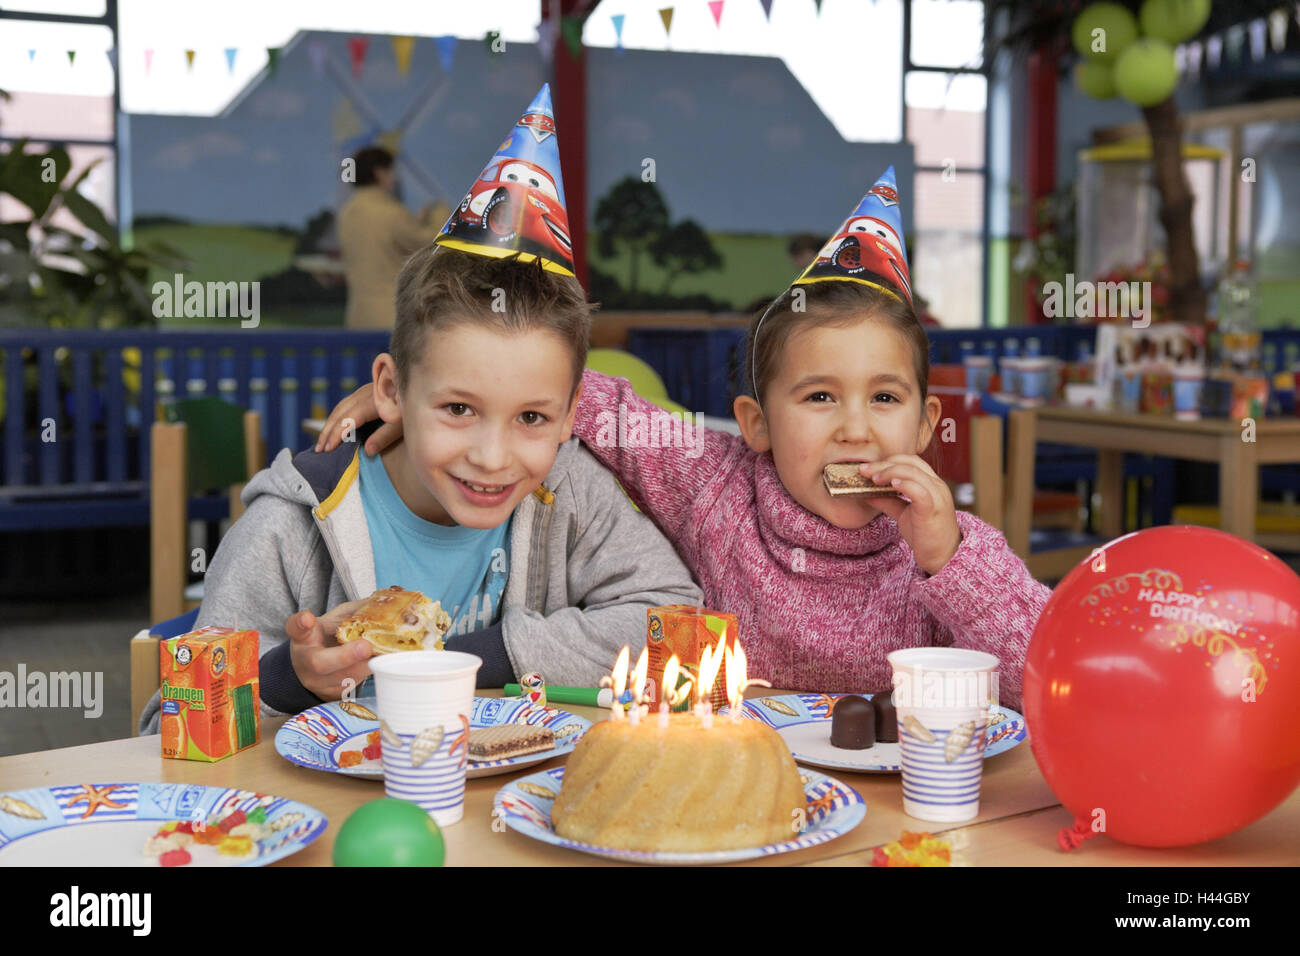 Children's birthday party, boy, girl, paper hats, cakes, eat, people, children, siblings, birthday cakes, party, birthday party, celebrate, amusements, happy, party caps, headgear, fun, joy, lighthearted, candles, burn, birthday, Stock Photo